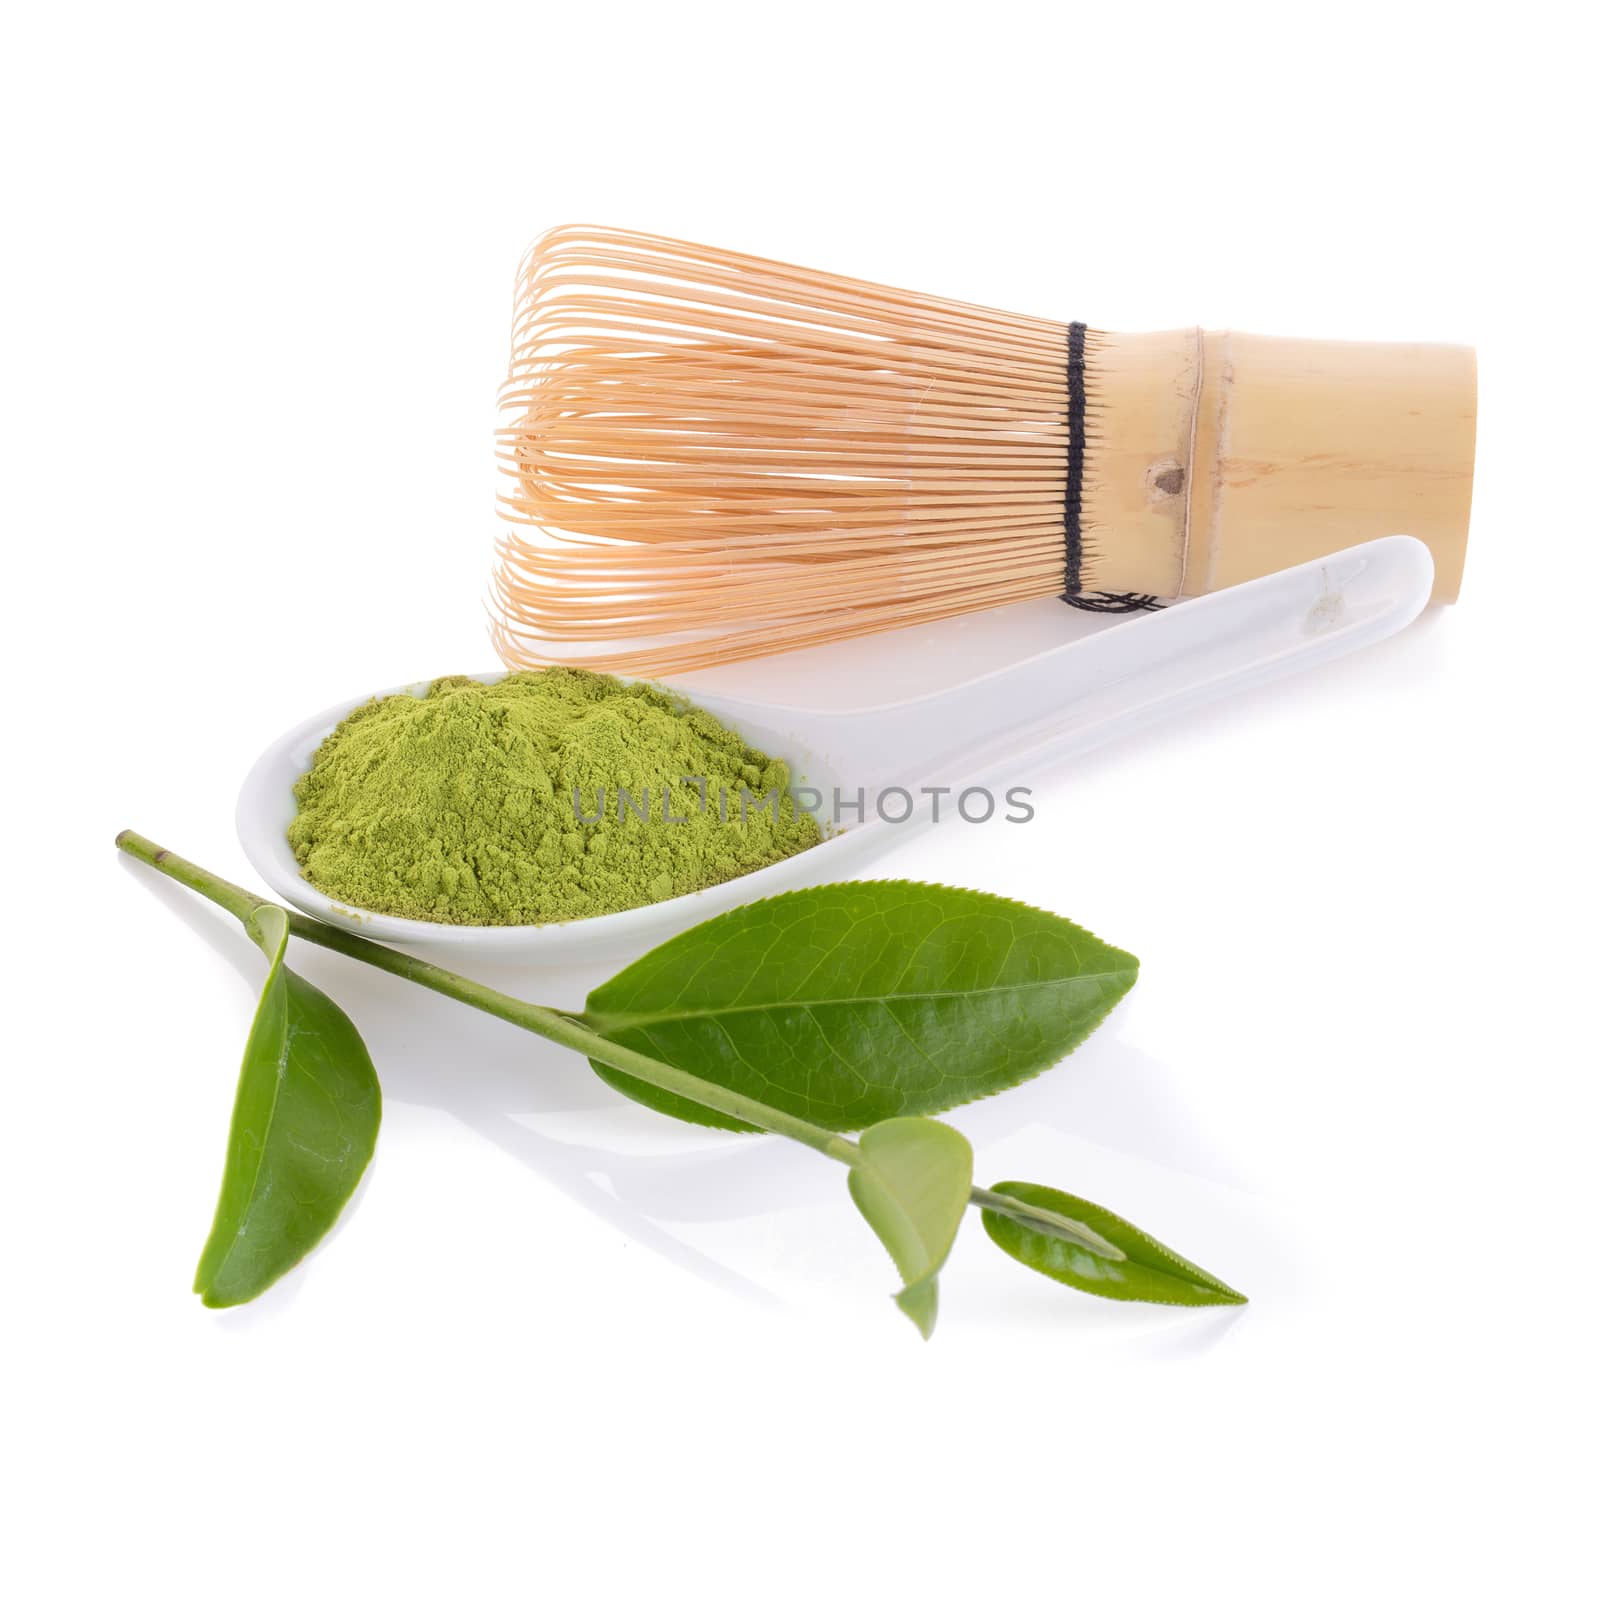 matcha powder in White ceramic spoon and whisk isolated on white background.